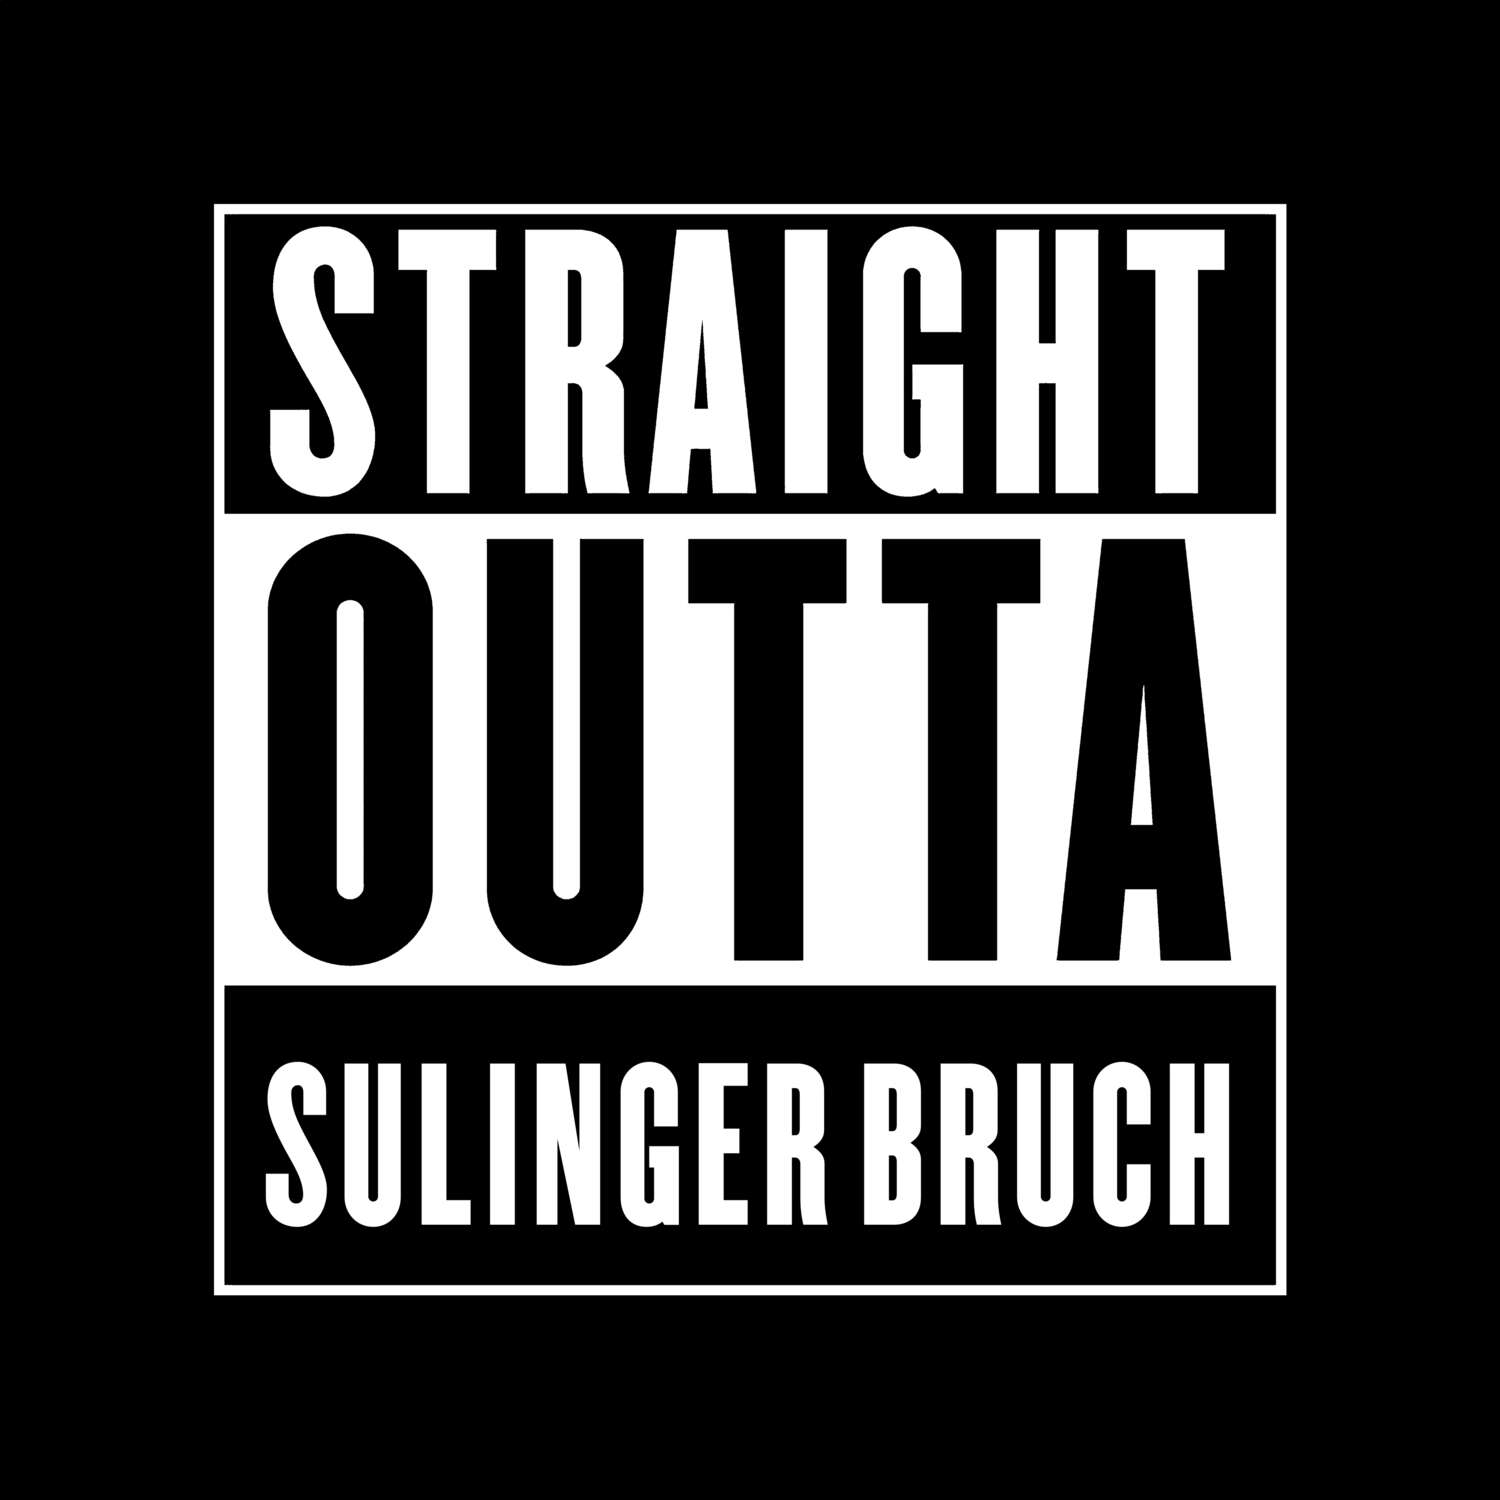 Sulinger Bruch T-Shirt »Straight Outta«